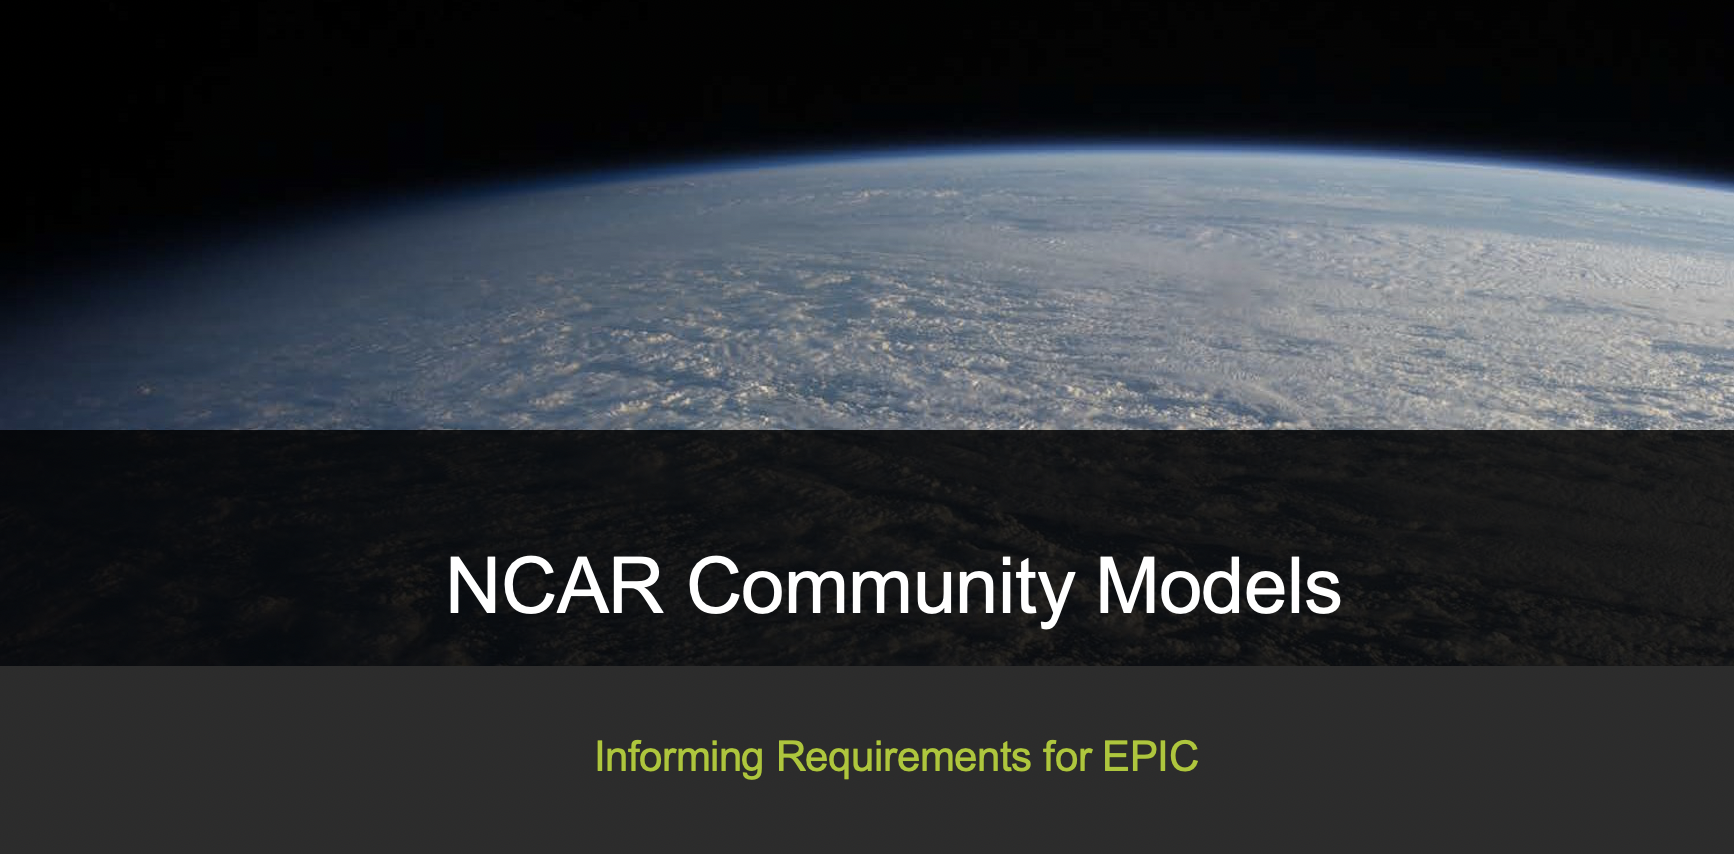 NCAR Community Models: Informing Requirements for EPIC